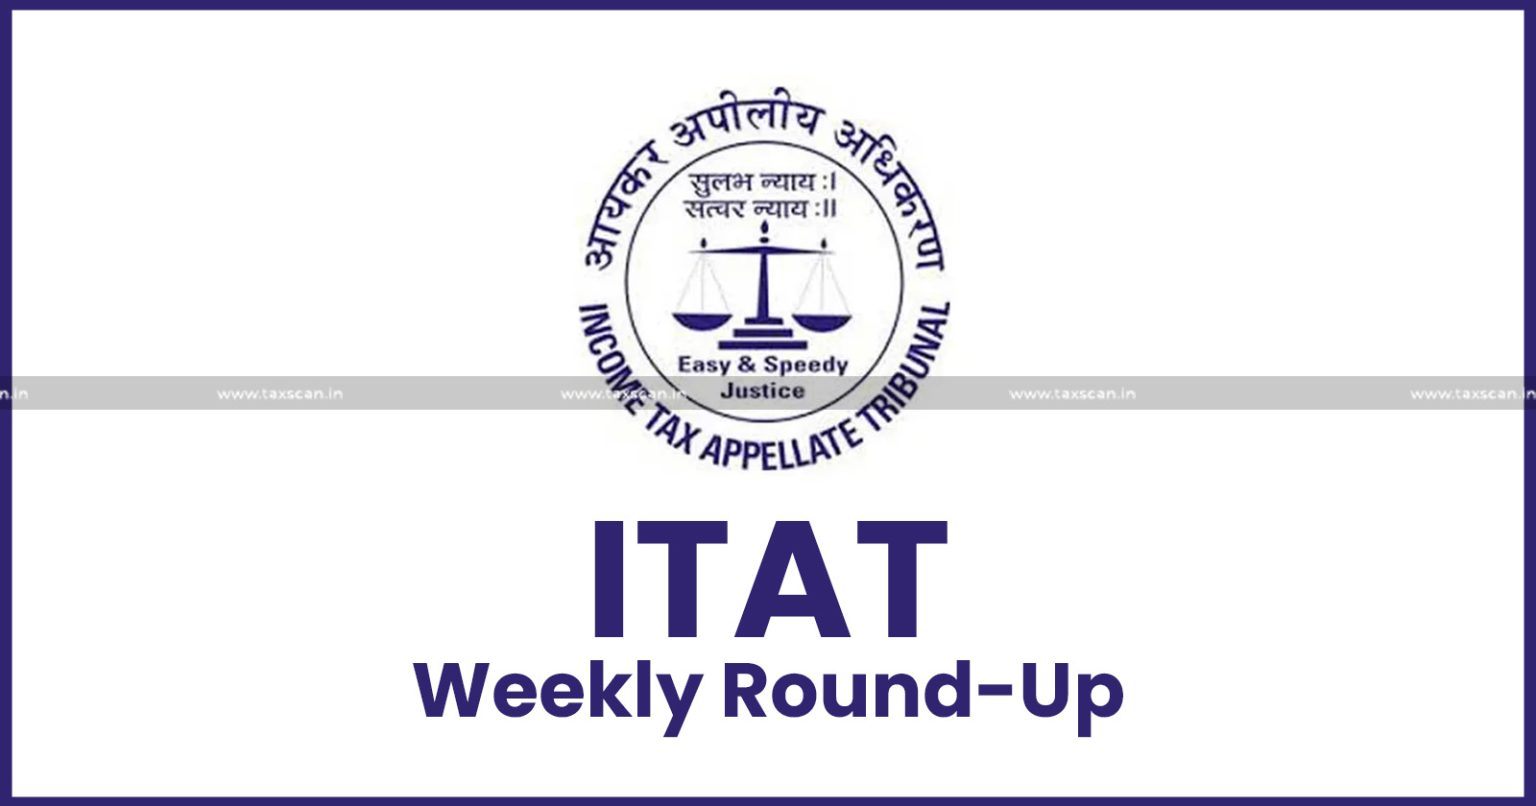 ITAT Weekly round up - ITAT Weekly news - Weekly round up - Income Tax - ITAT - TAXSCAN